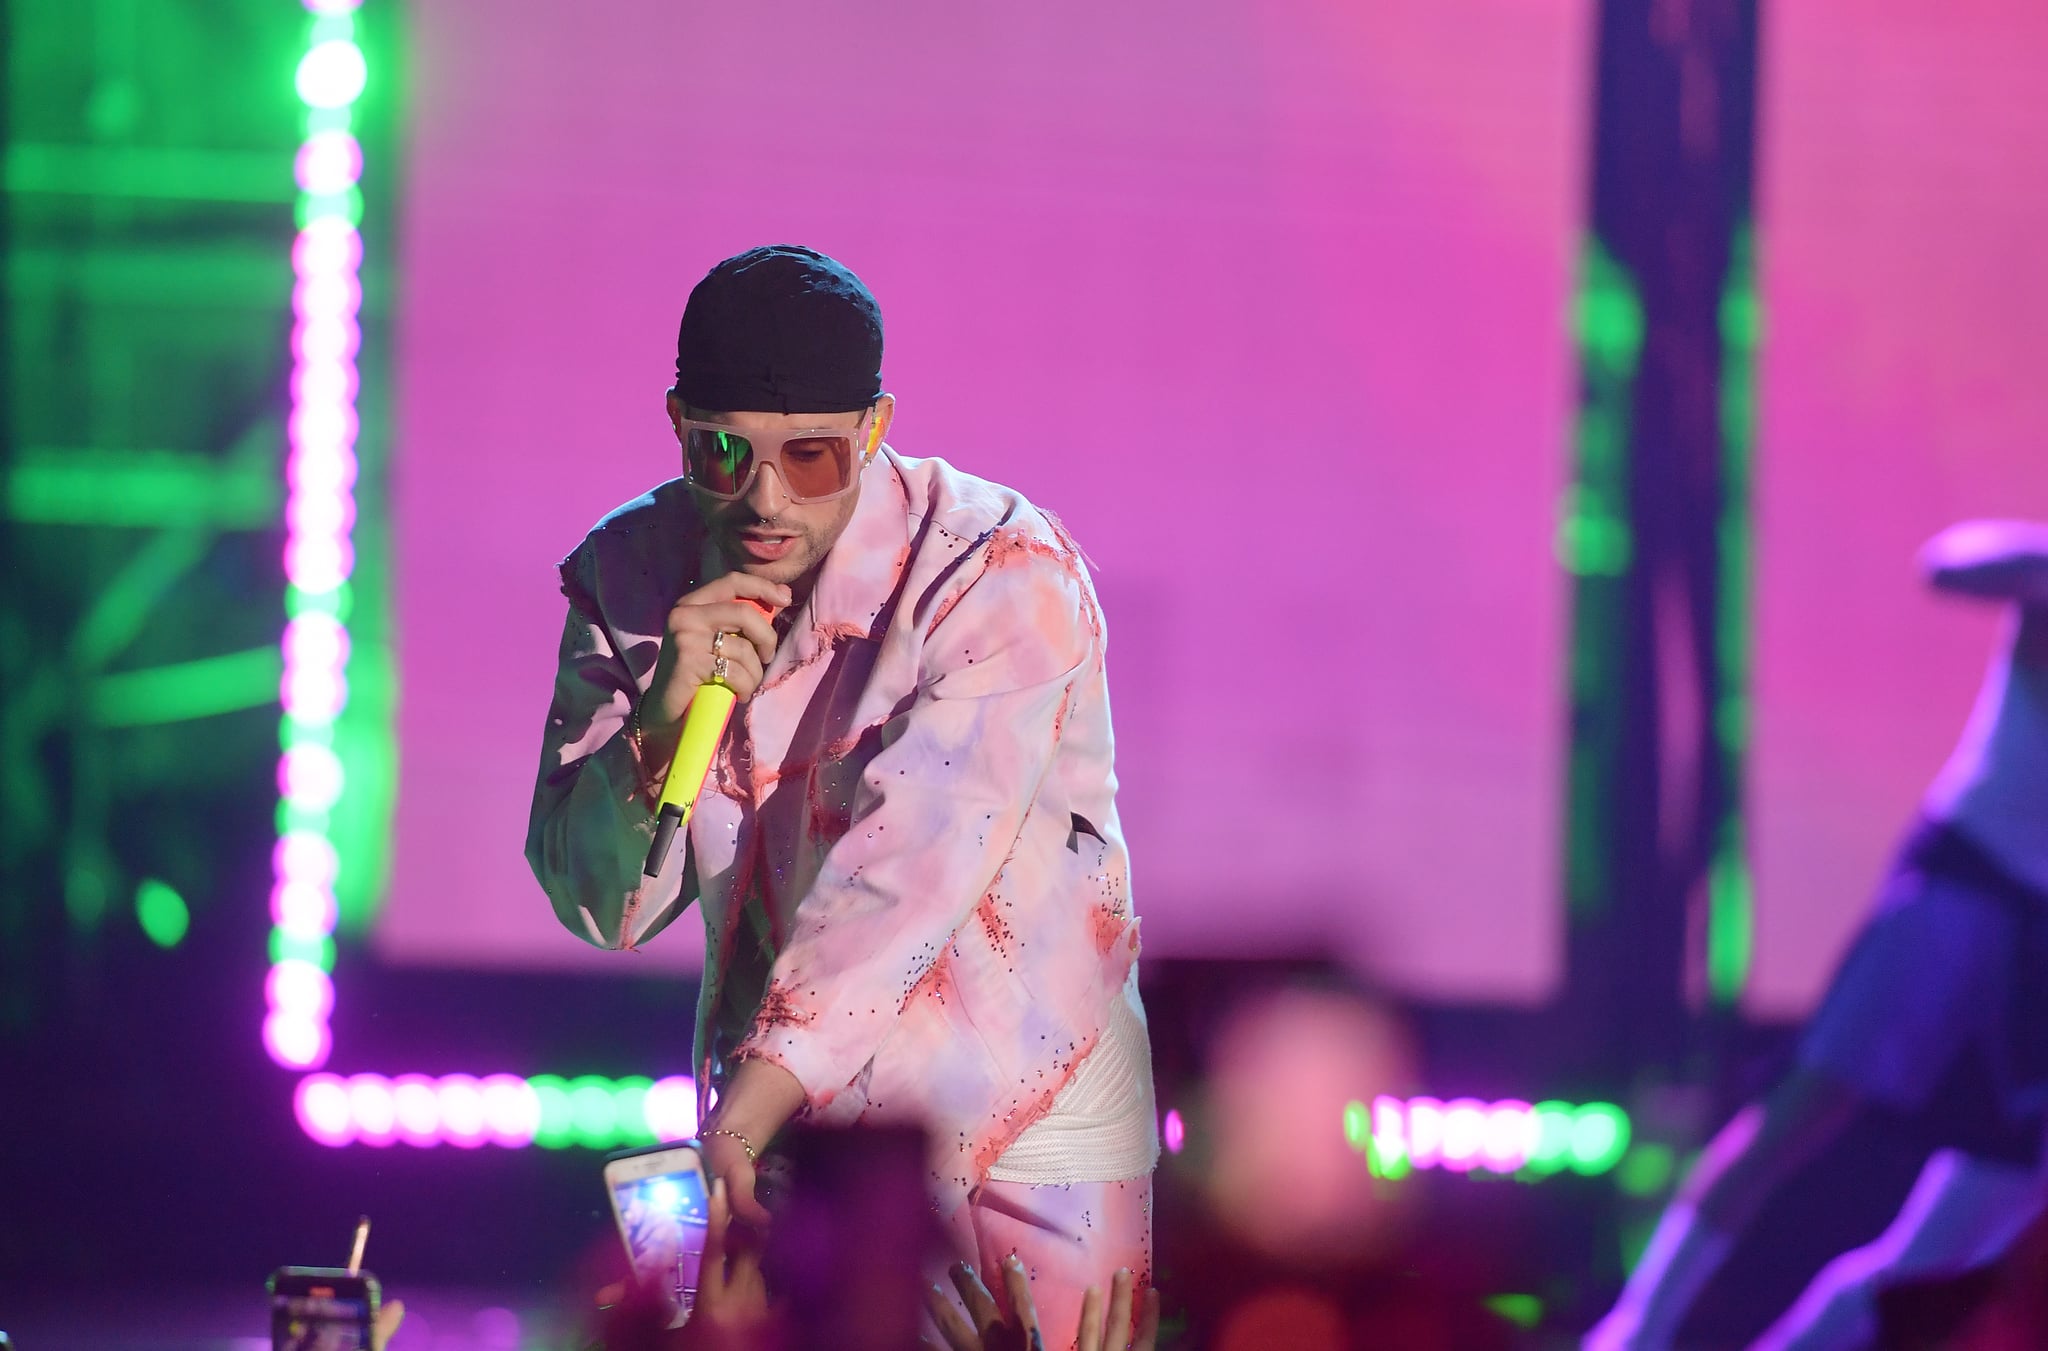 MEXICO CITY, MEXICO - MARCH 05: Bad Bunny performs onstage during the 2020 Spotify Awards at the Auditorio Nacional on March 05, 2020 in Mexico City, Mexico. (Photo by Matt Winkelmeyer/Getty Images for Spotify)